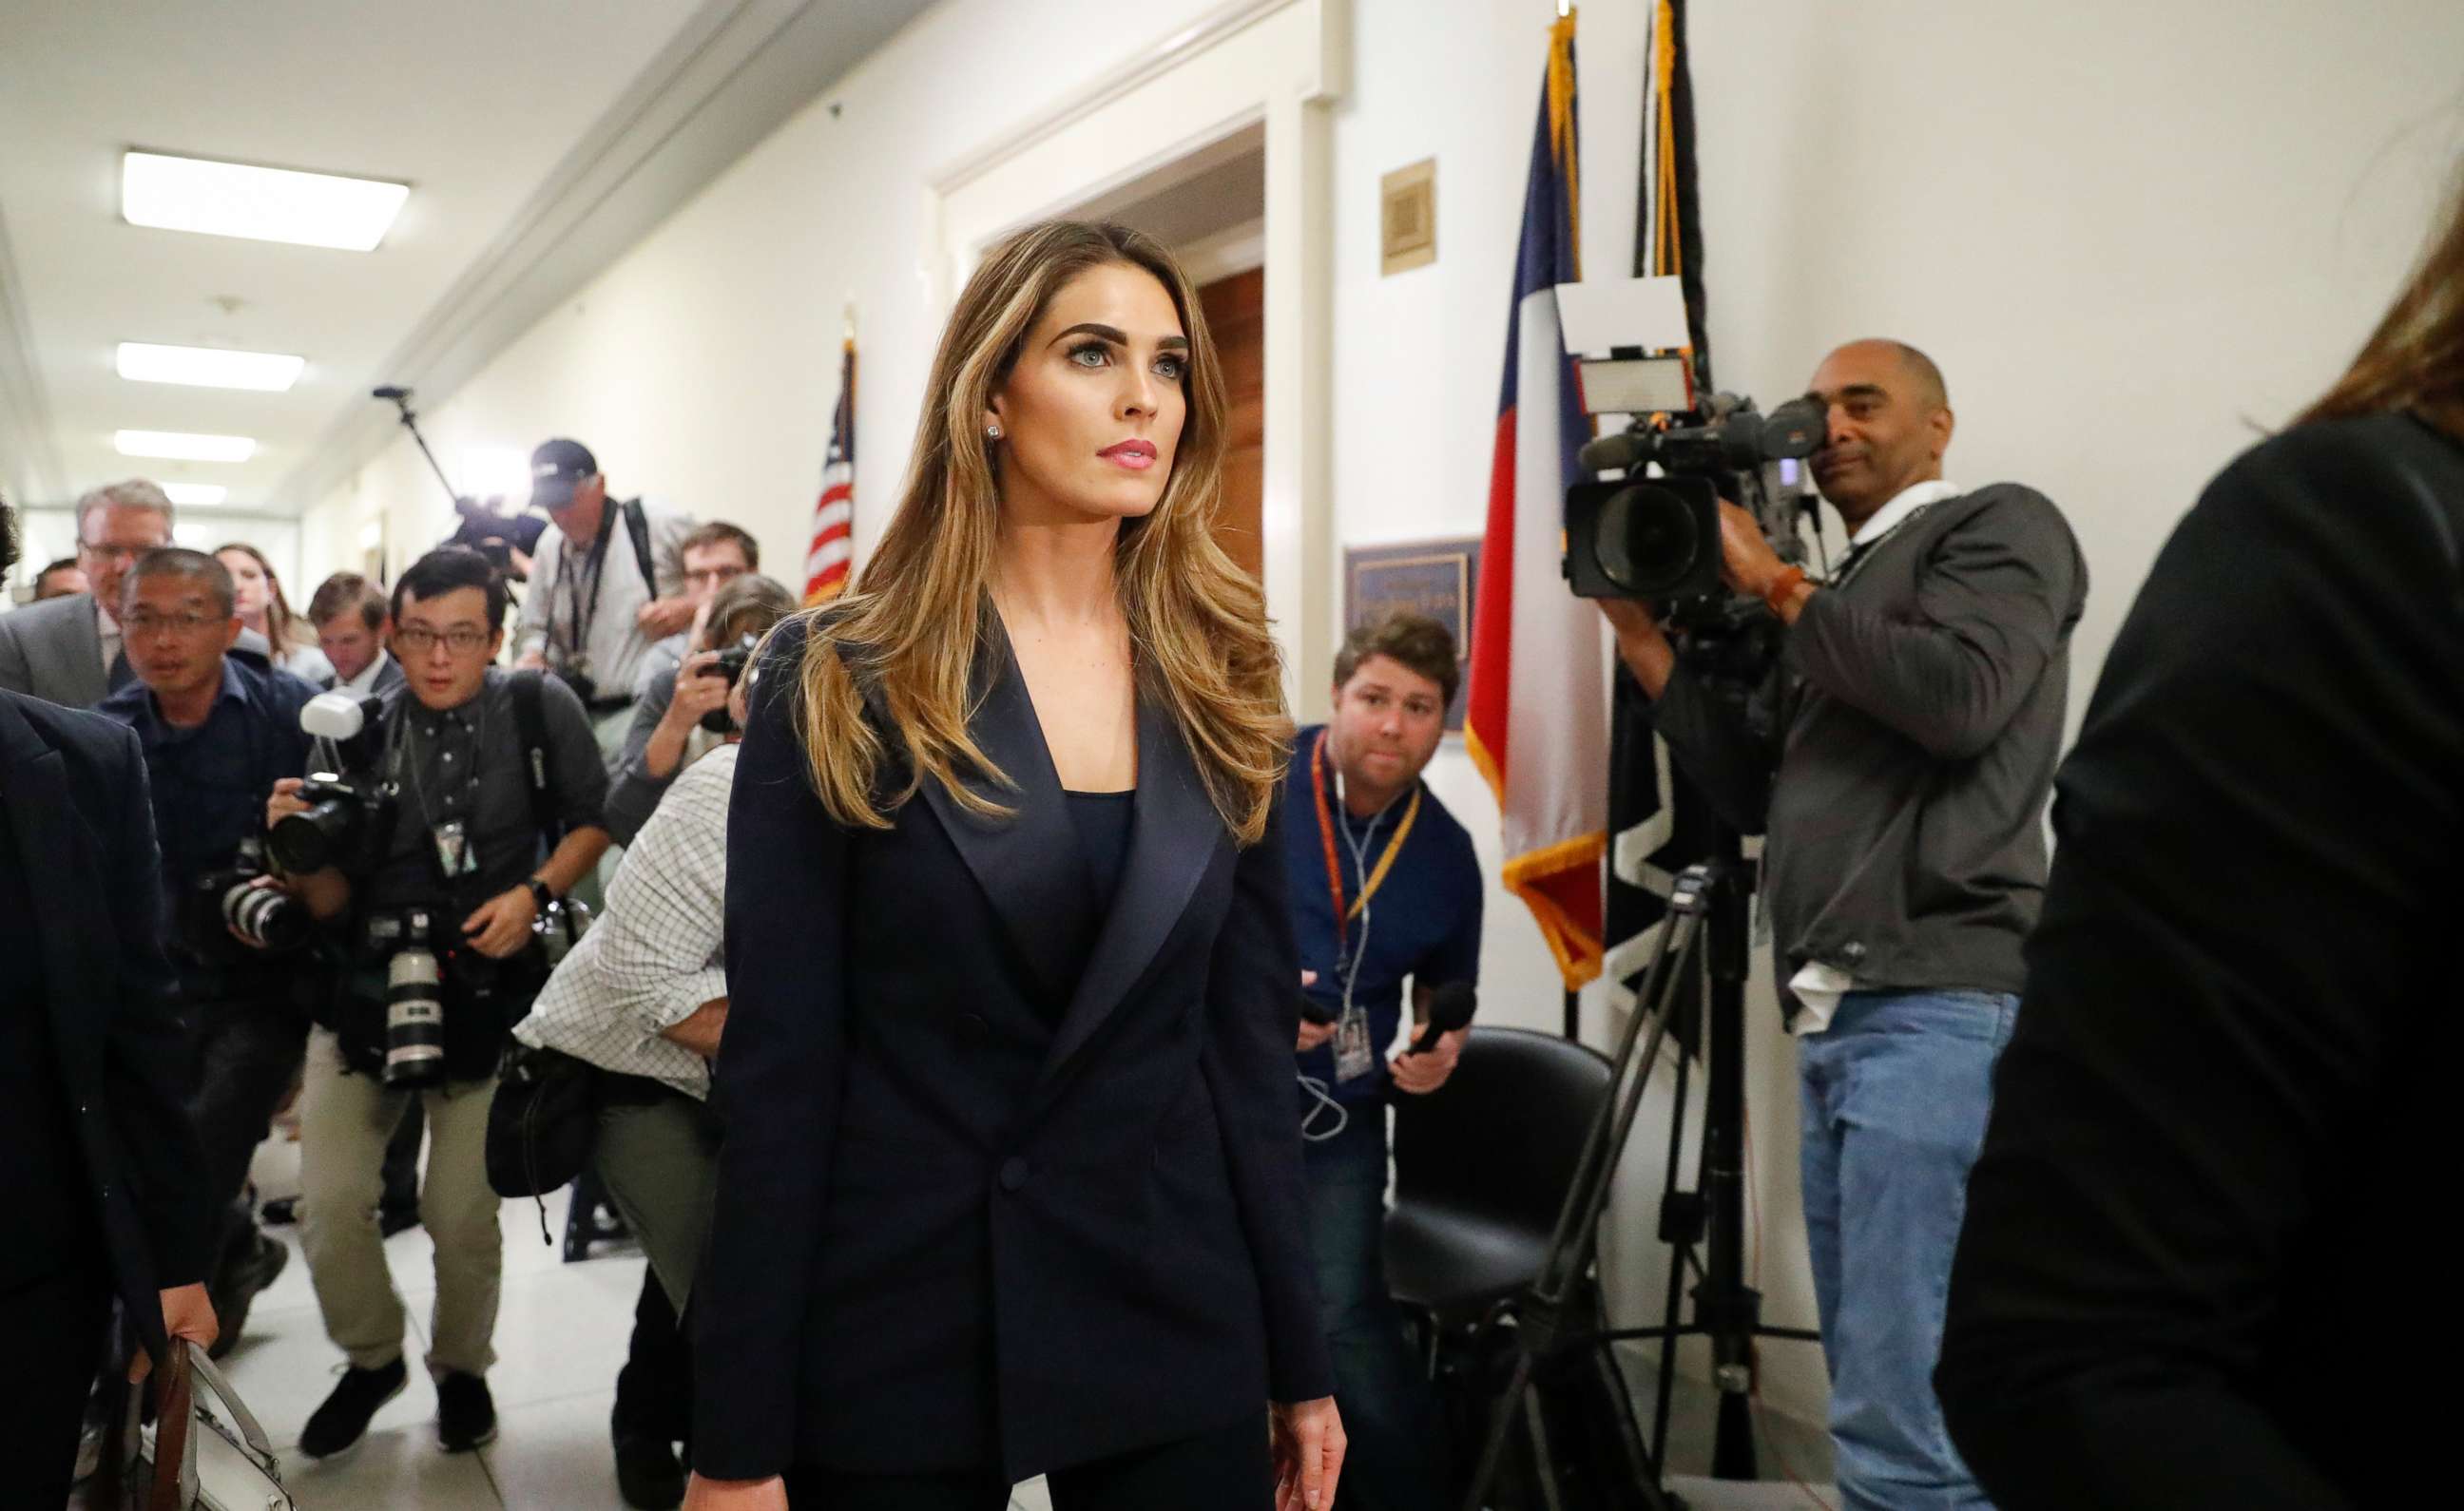 PHOTO: Former White House communications director Hope Hicks leaving a closed-door interview with the House Judiciary Committee for a lunch break, at the Capitol in Washington, June 19, 2019.